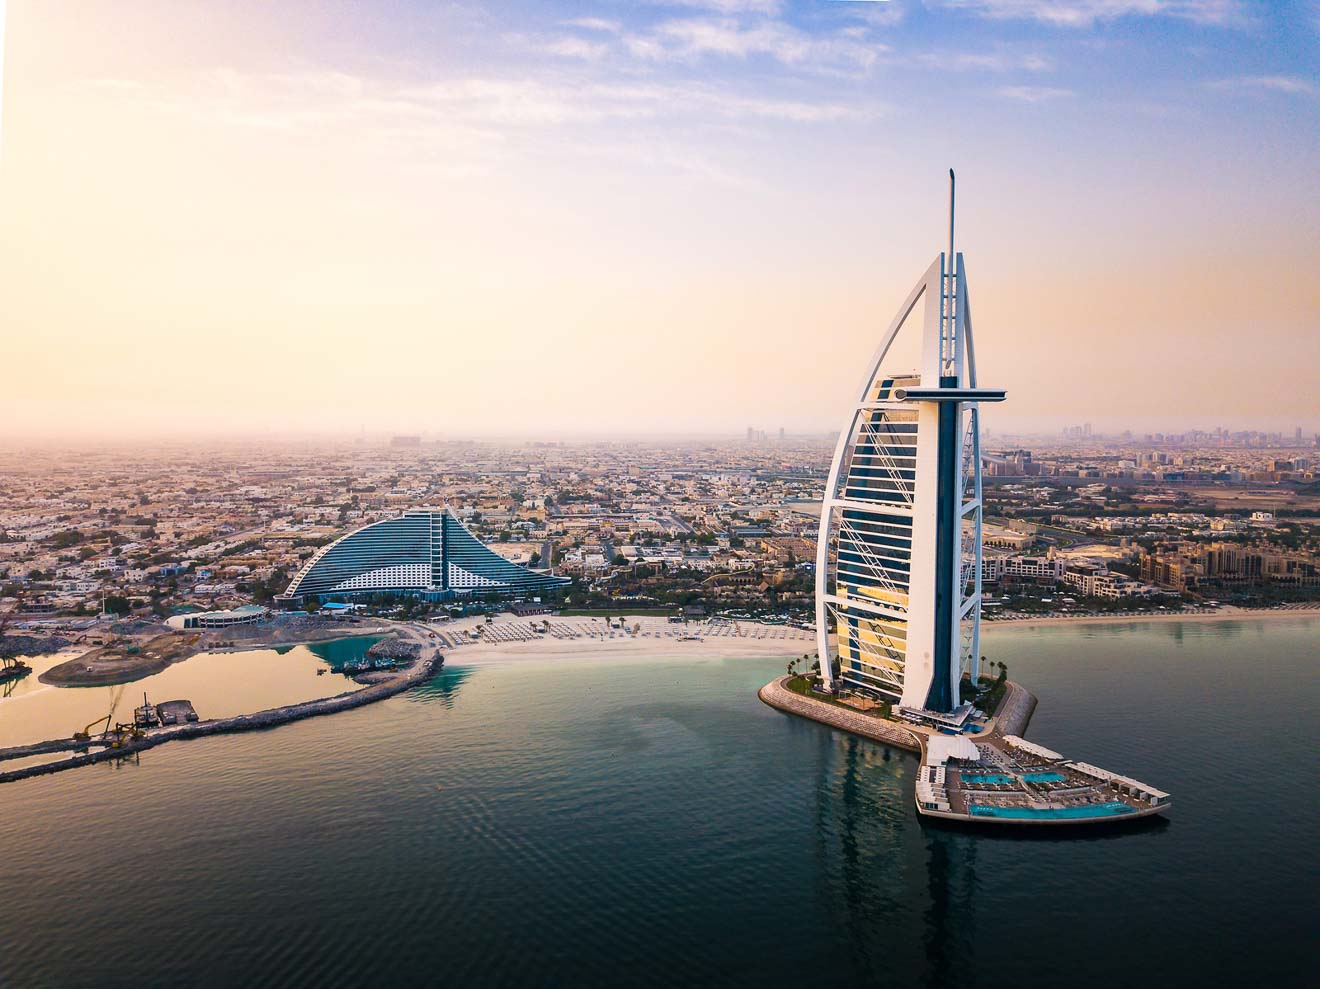 Iconic Burj Al Arab hotel in Dubai captured at sunset, with its sail-shaped structure overlooking the Persian Gulf.